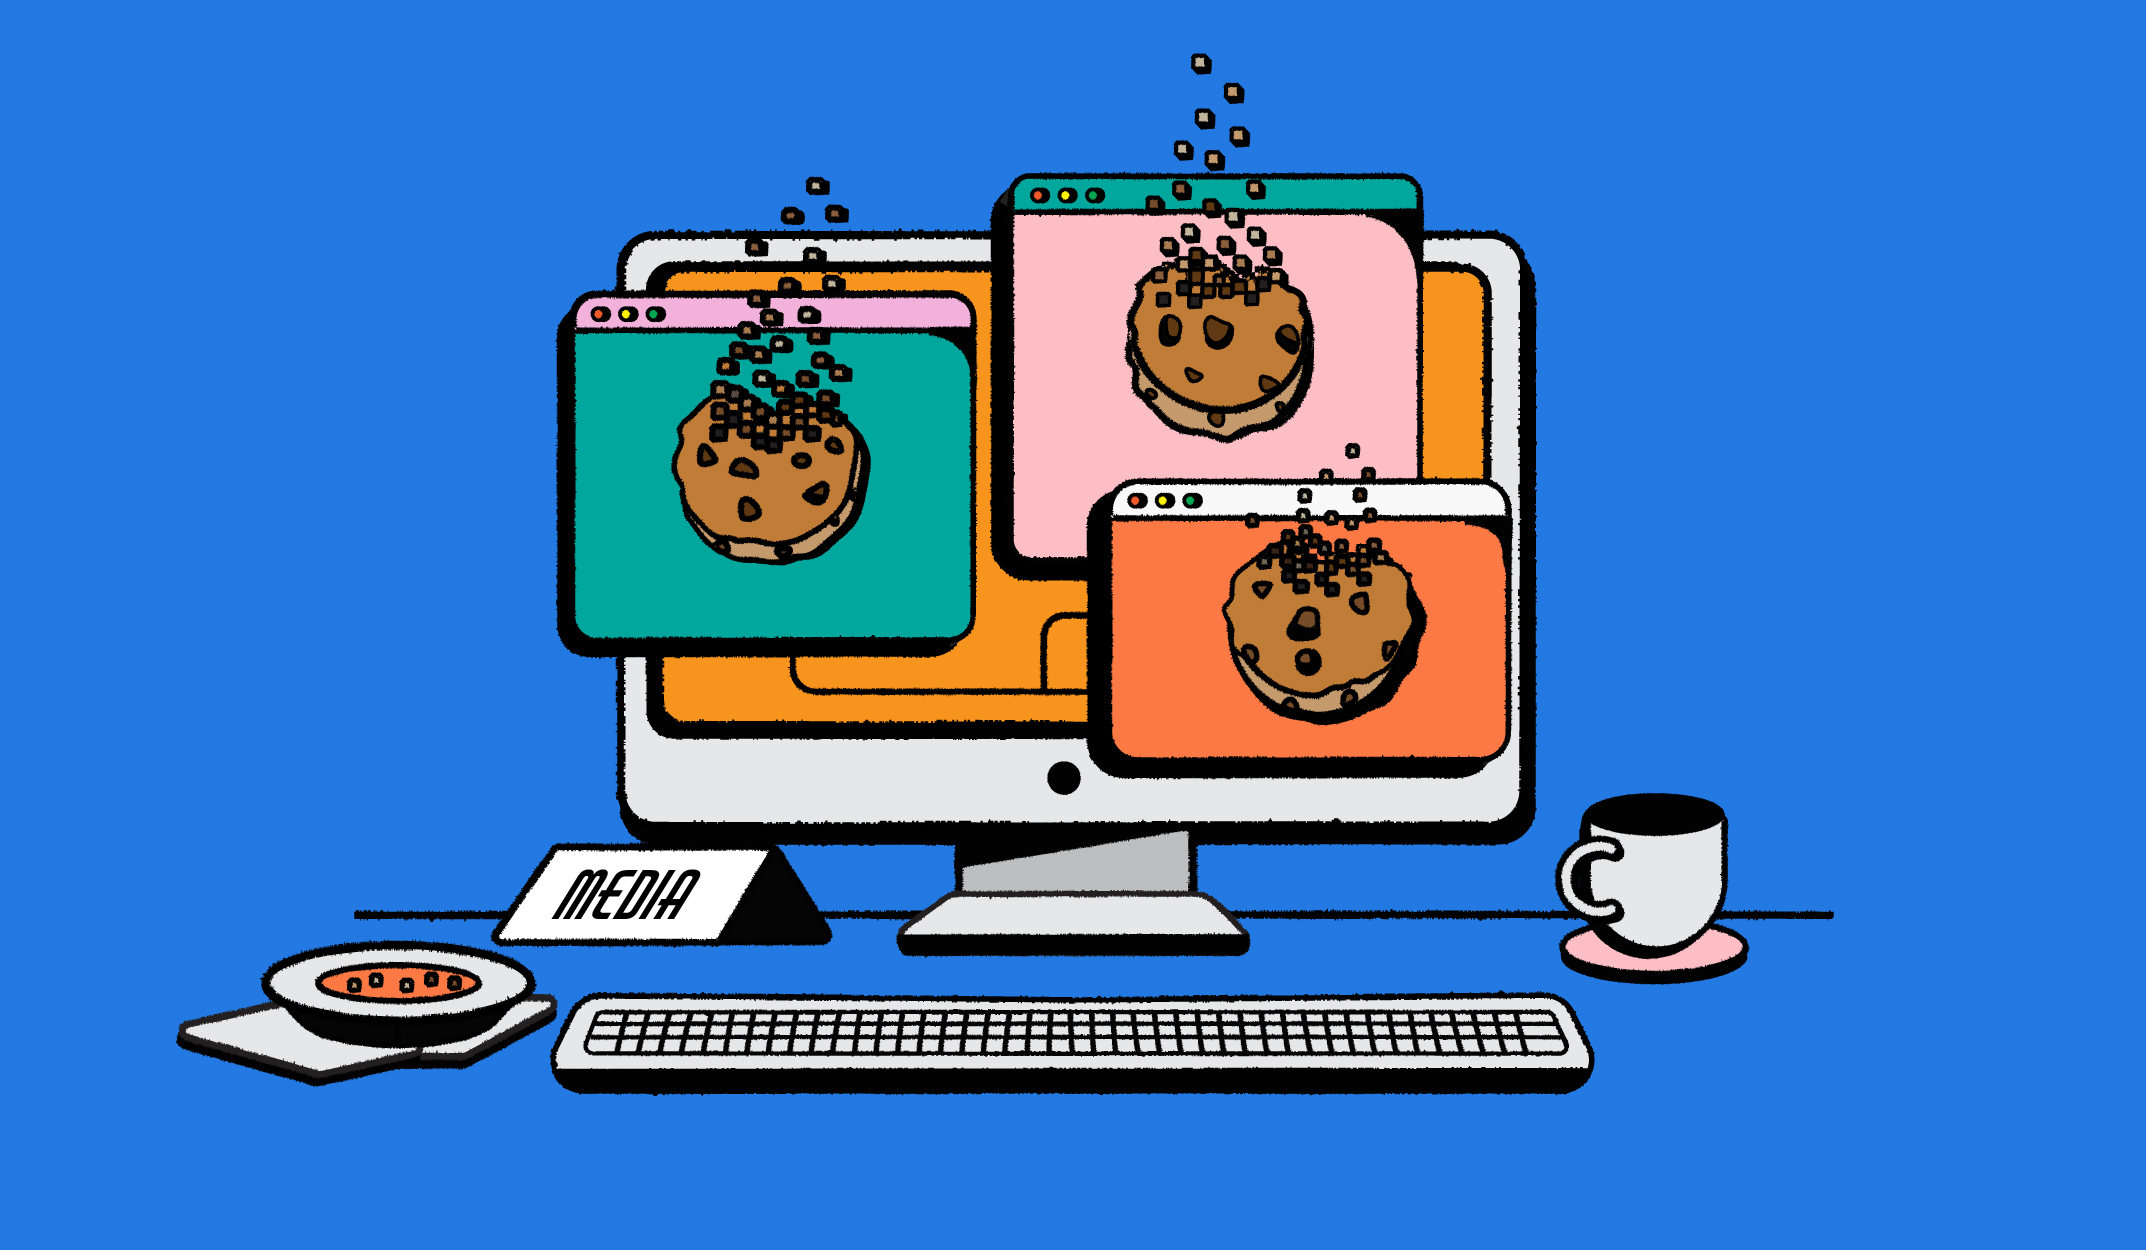 Though cookie alternatives are out there, agencies have their issues with them all - Digiday